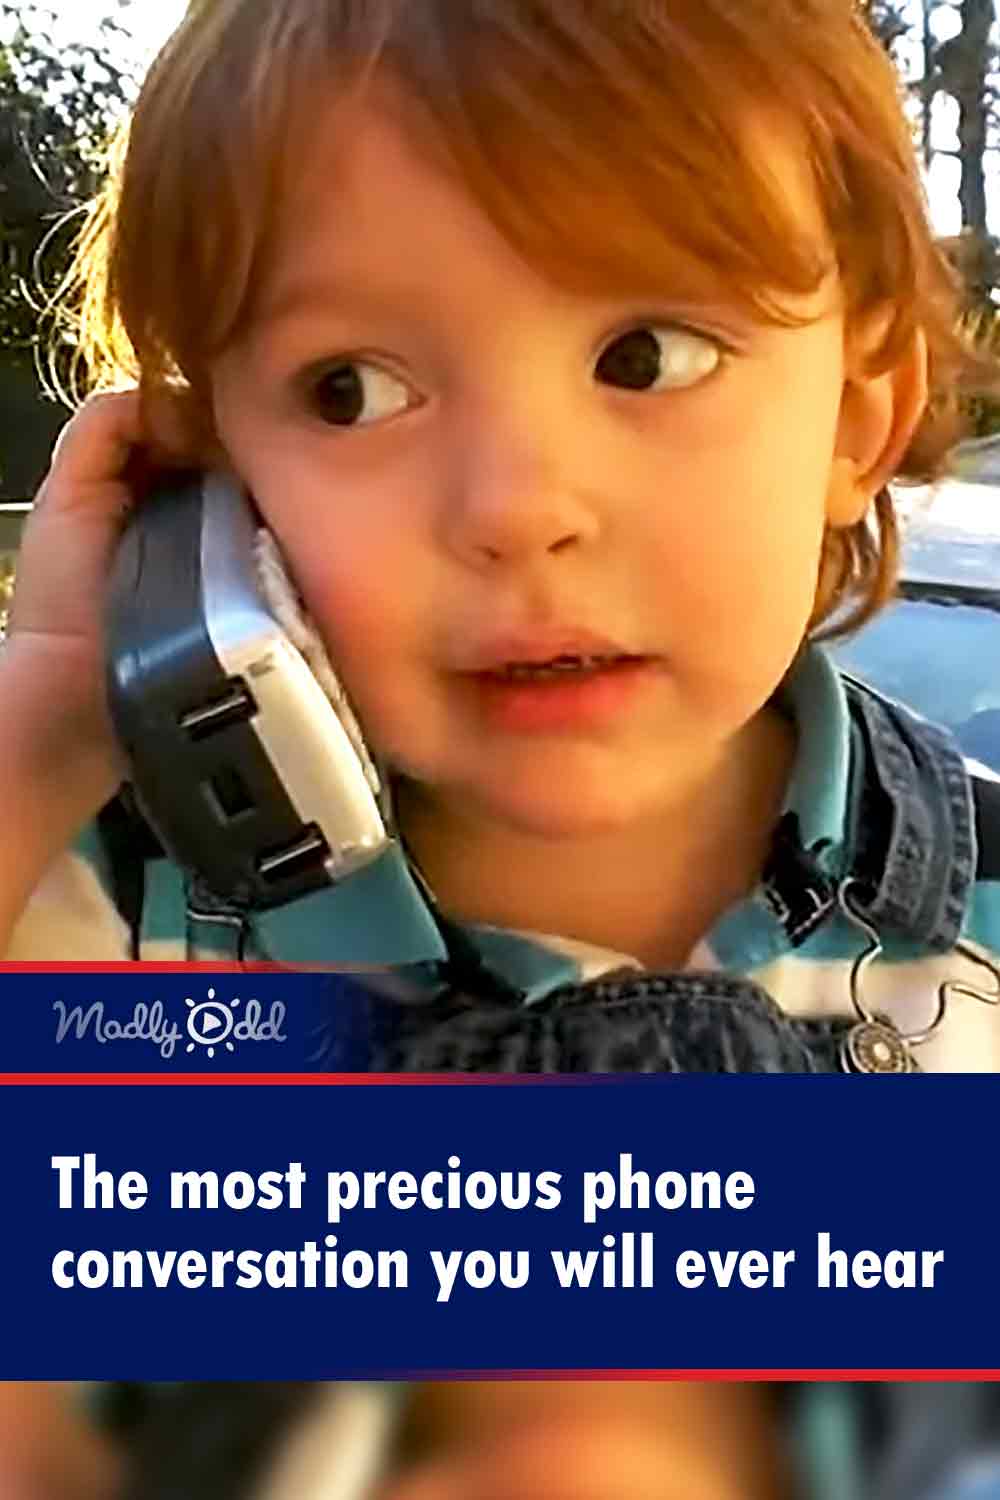 The most precious phone conversation you will ever hear